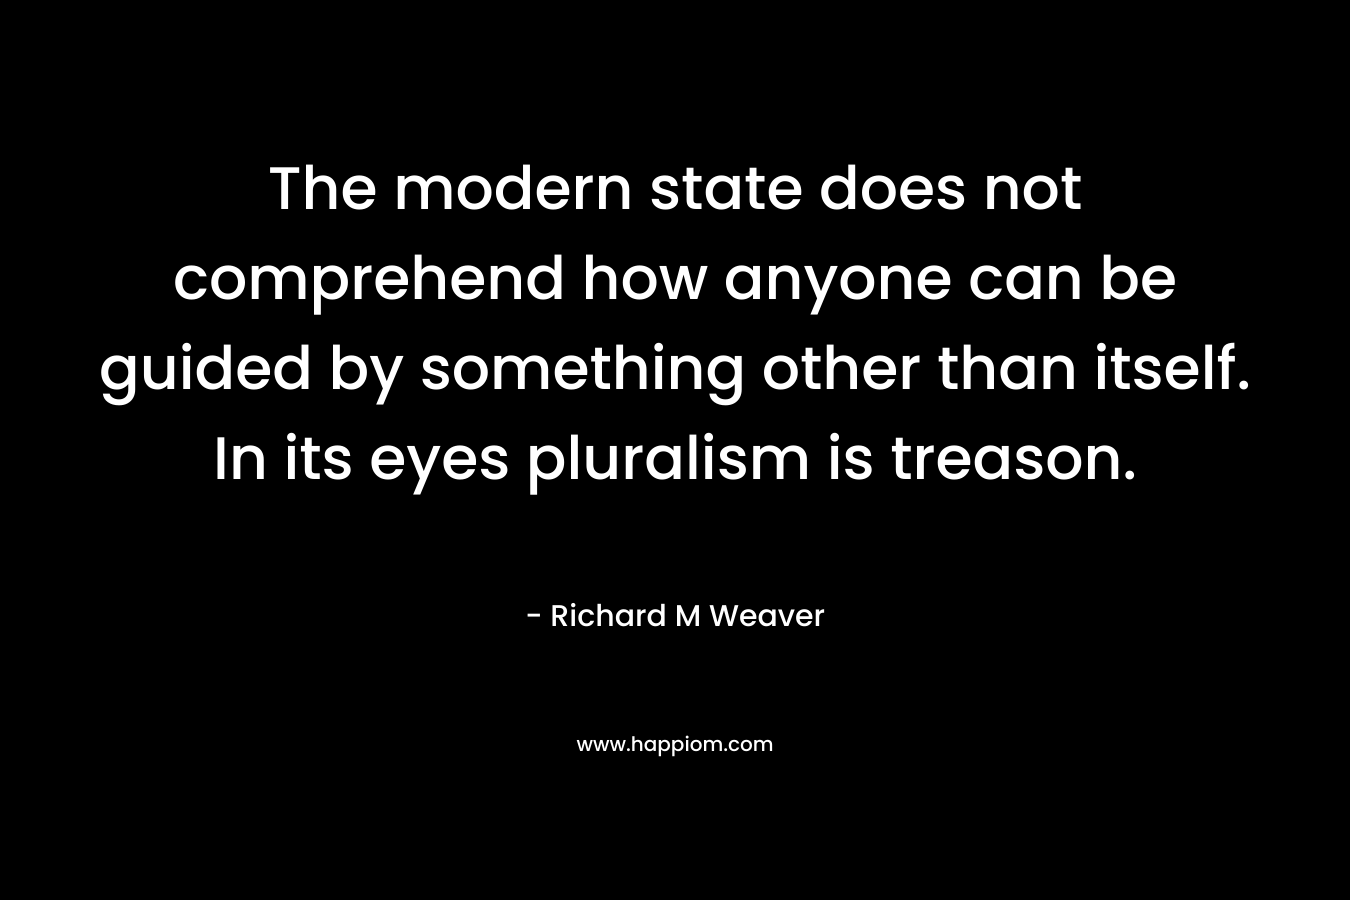 The modern state does not comprehend how anyone can be guided by something other than itself. In its eyes pluralism is treason. – Richard M Weaver